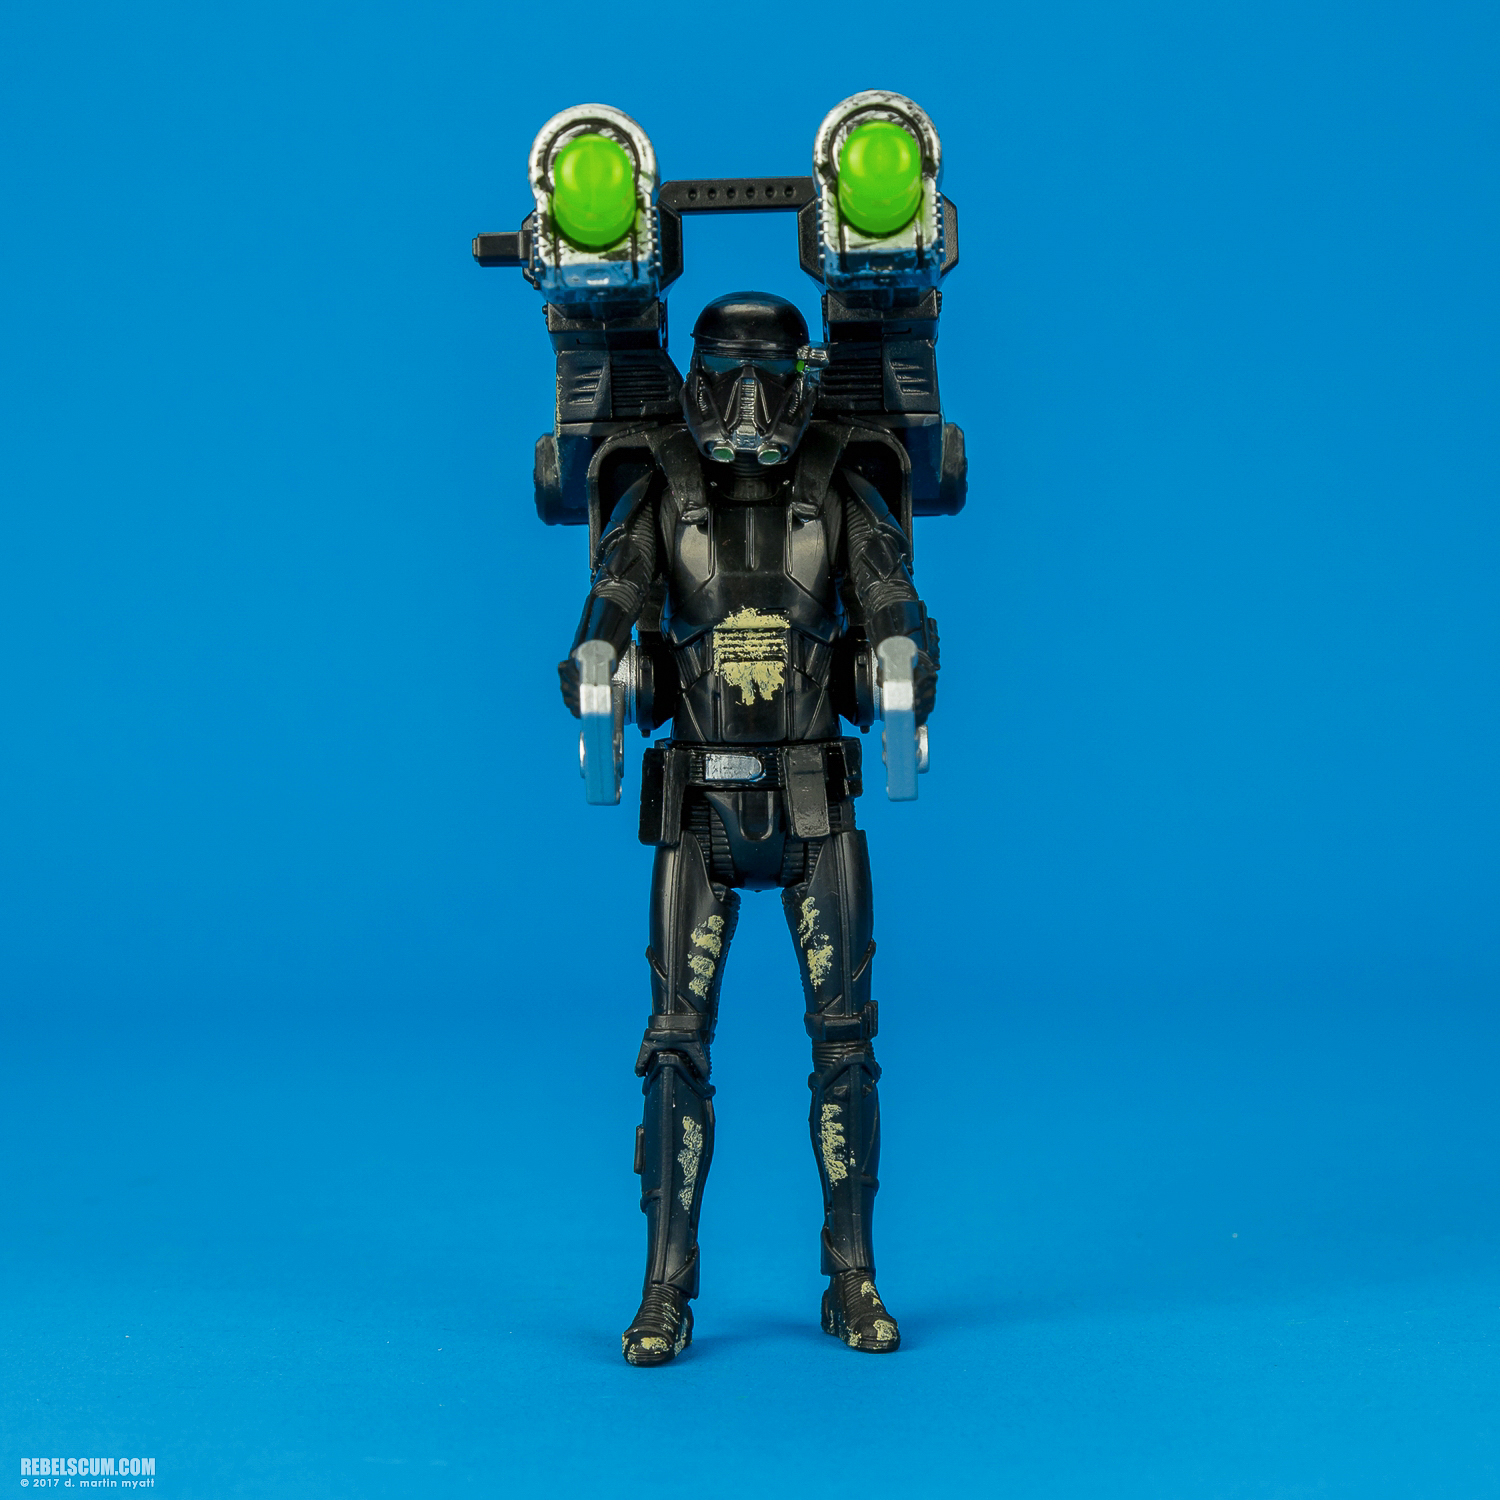 Kohls-Exclusive-Four-Pack-Rogue-One-B9605-005.jpg